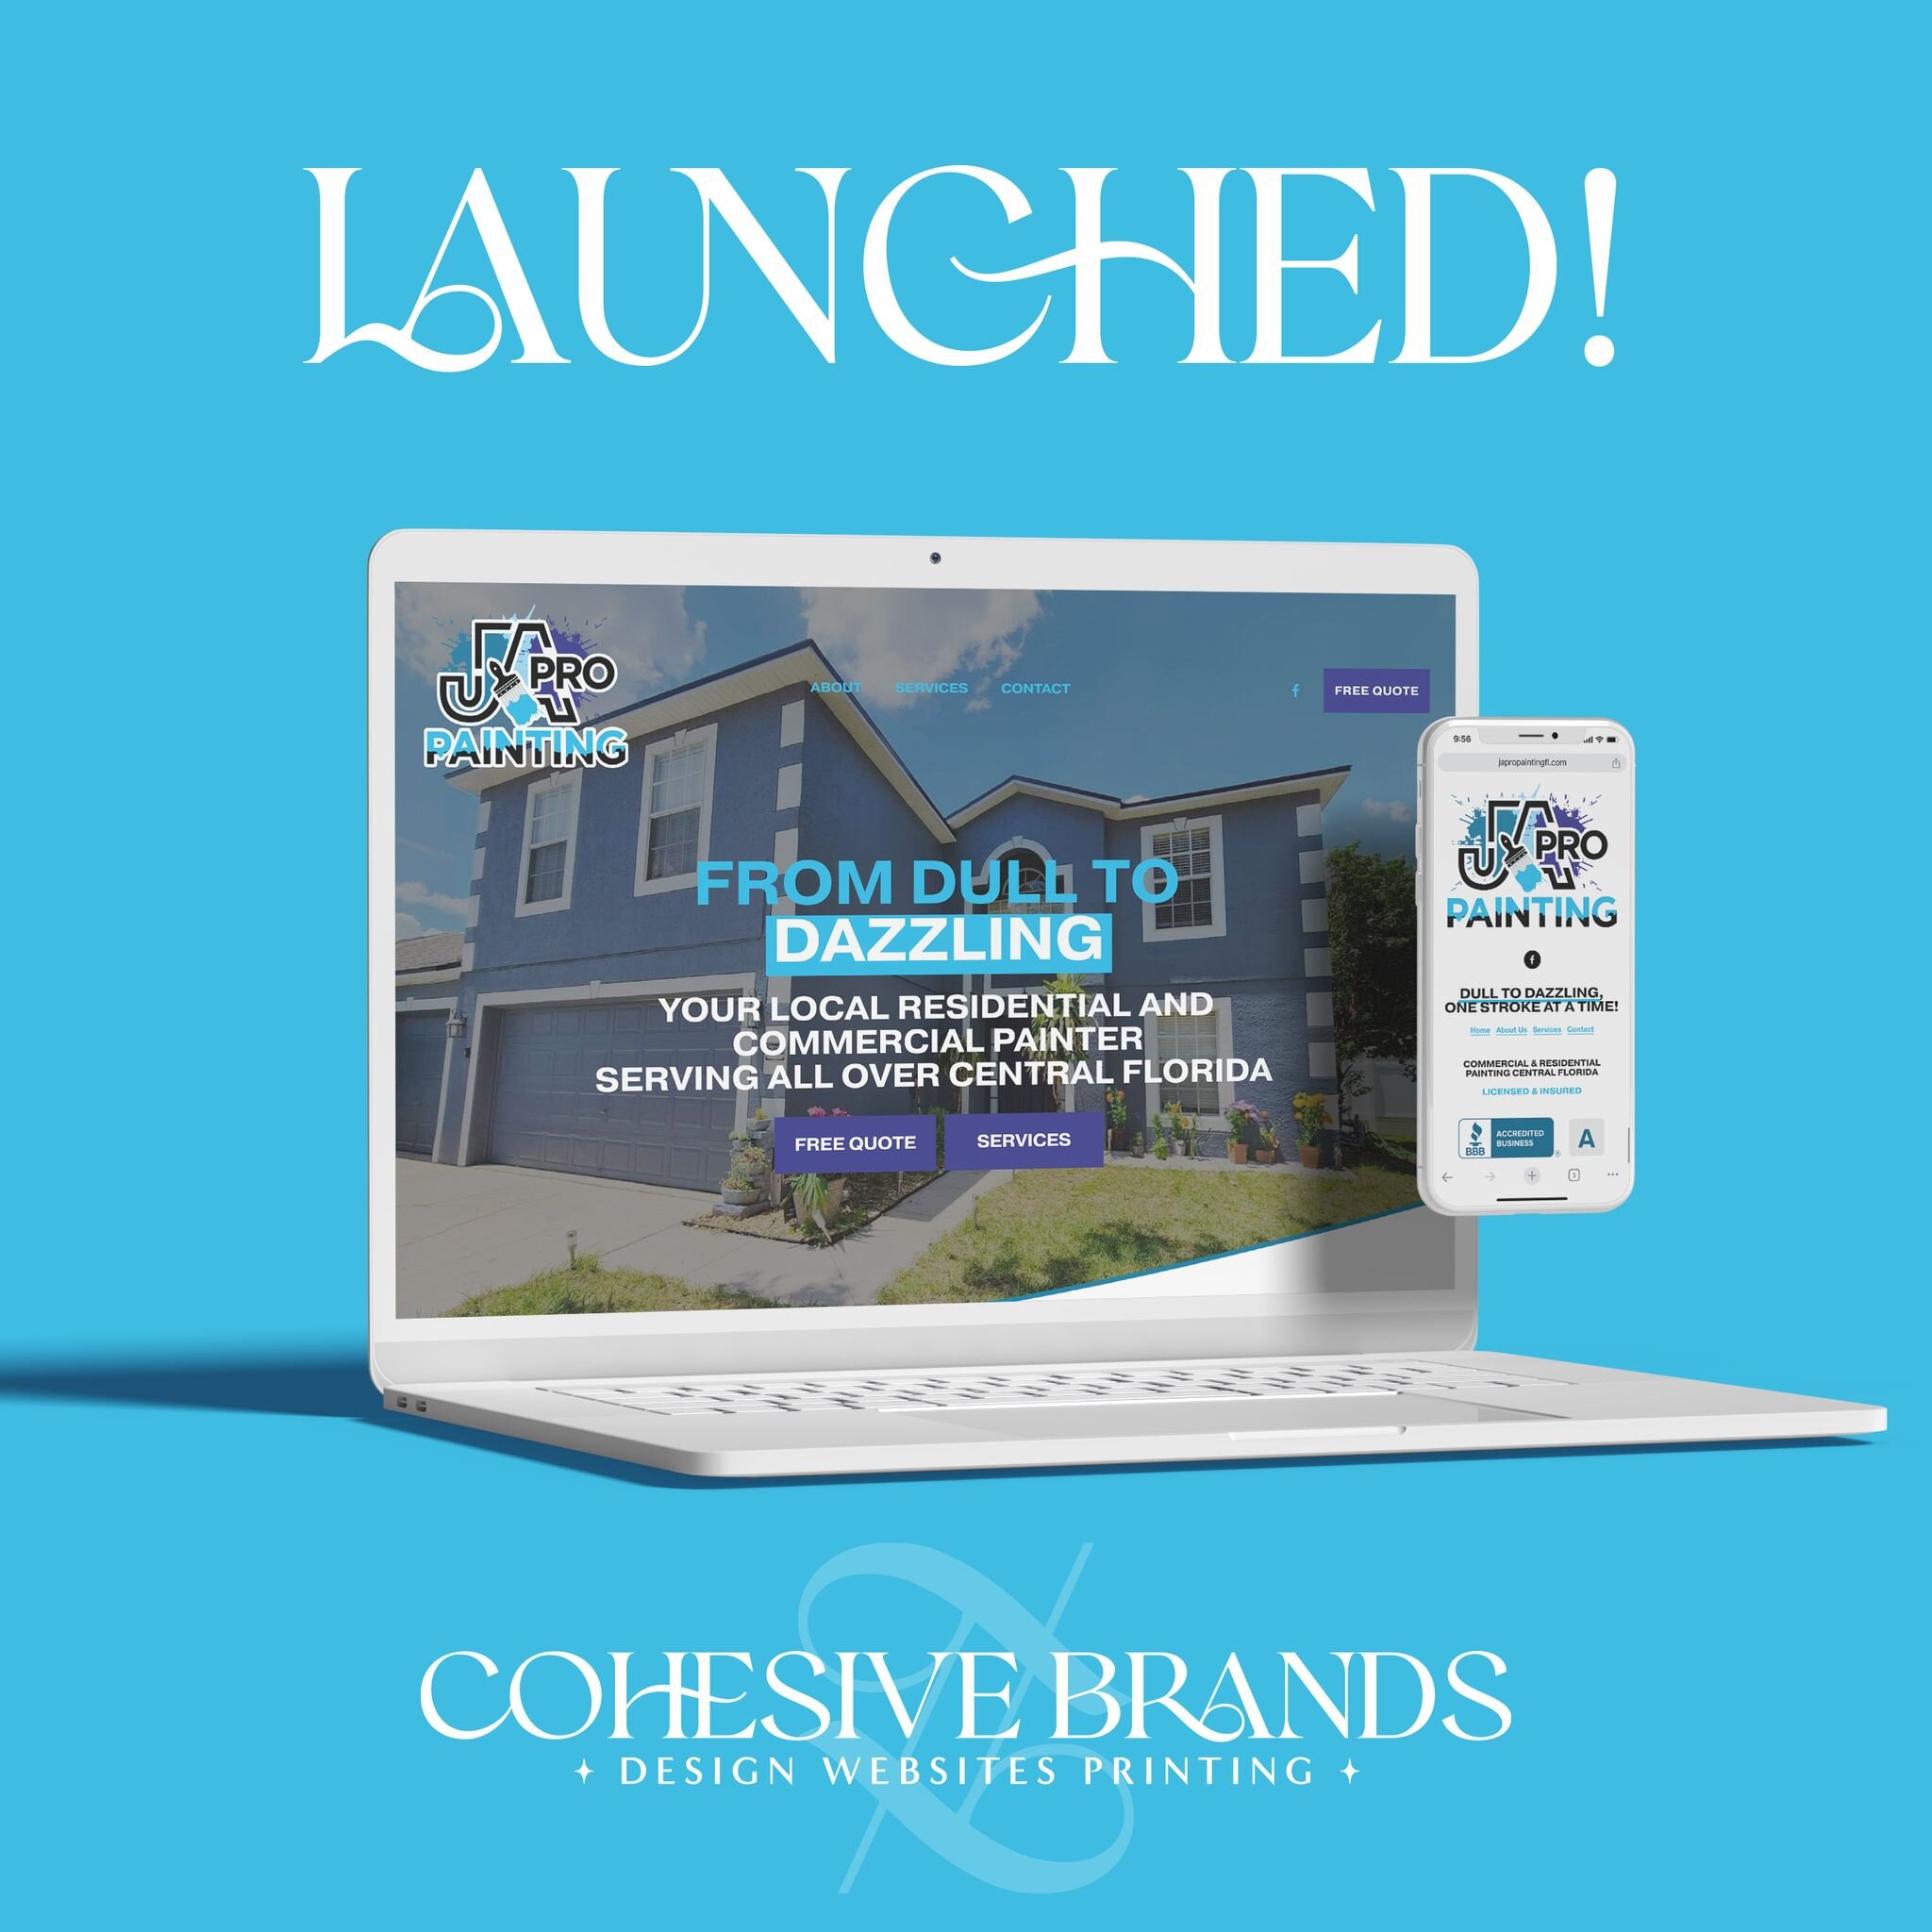 It's launched Friday over here at Cohesive Brands! 🚀 New website is propagating! We started with a brand-new logo design and finished up with a beautiful website ✨🔥🚀 JA Pro Painting is your Central Florida residential and commercial painter! Famil